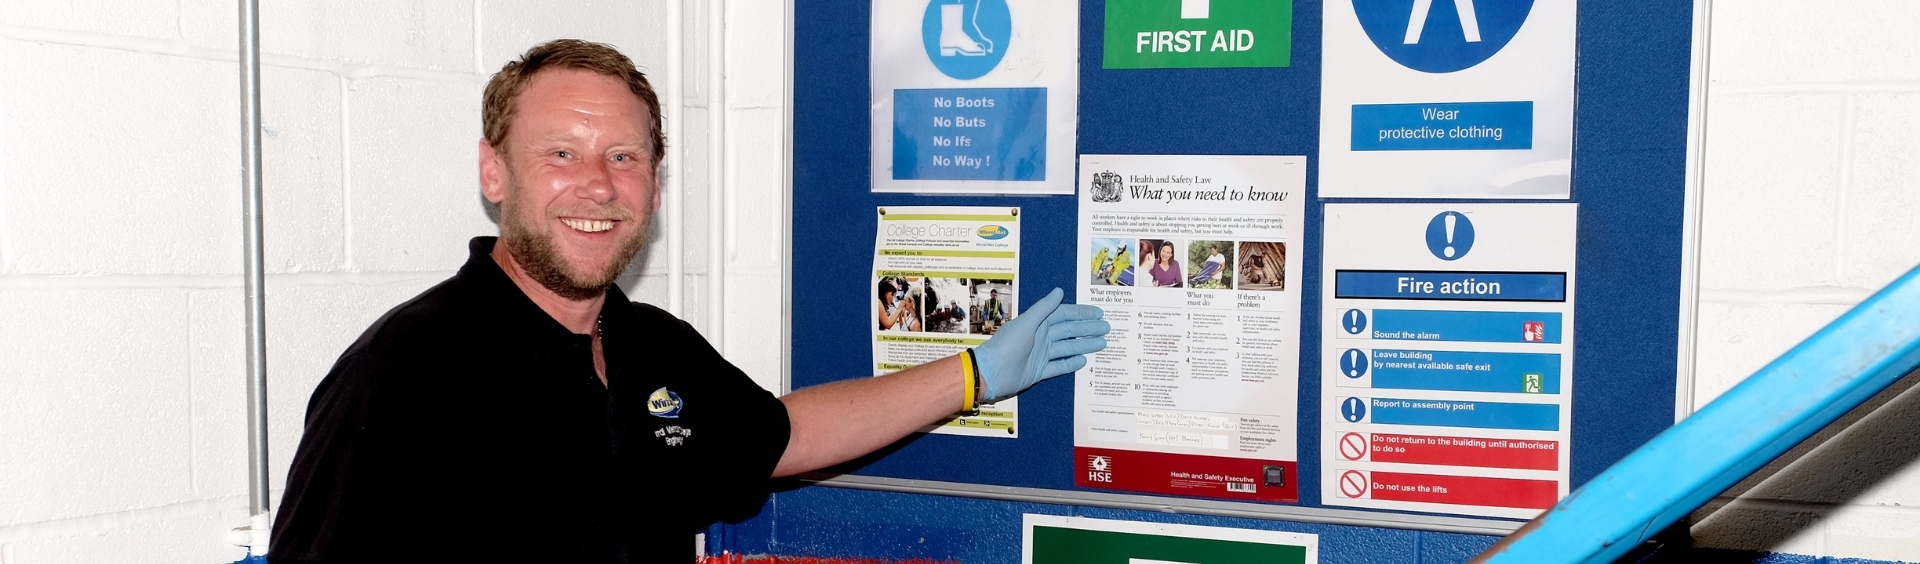 WMC NEBOSH General Certificate Unit NG2 student pointing at Health and Safety noticeboard